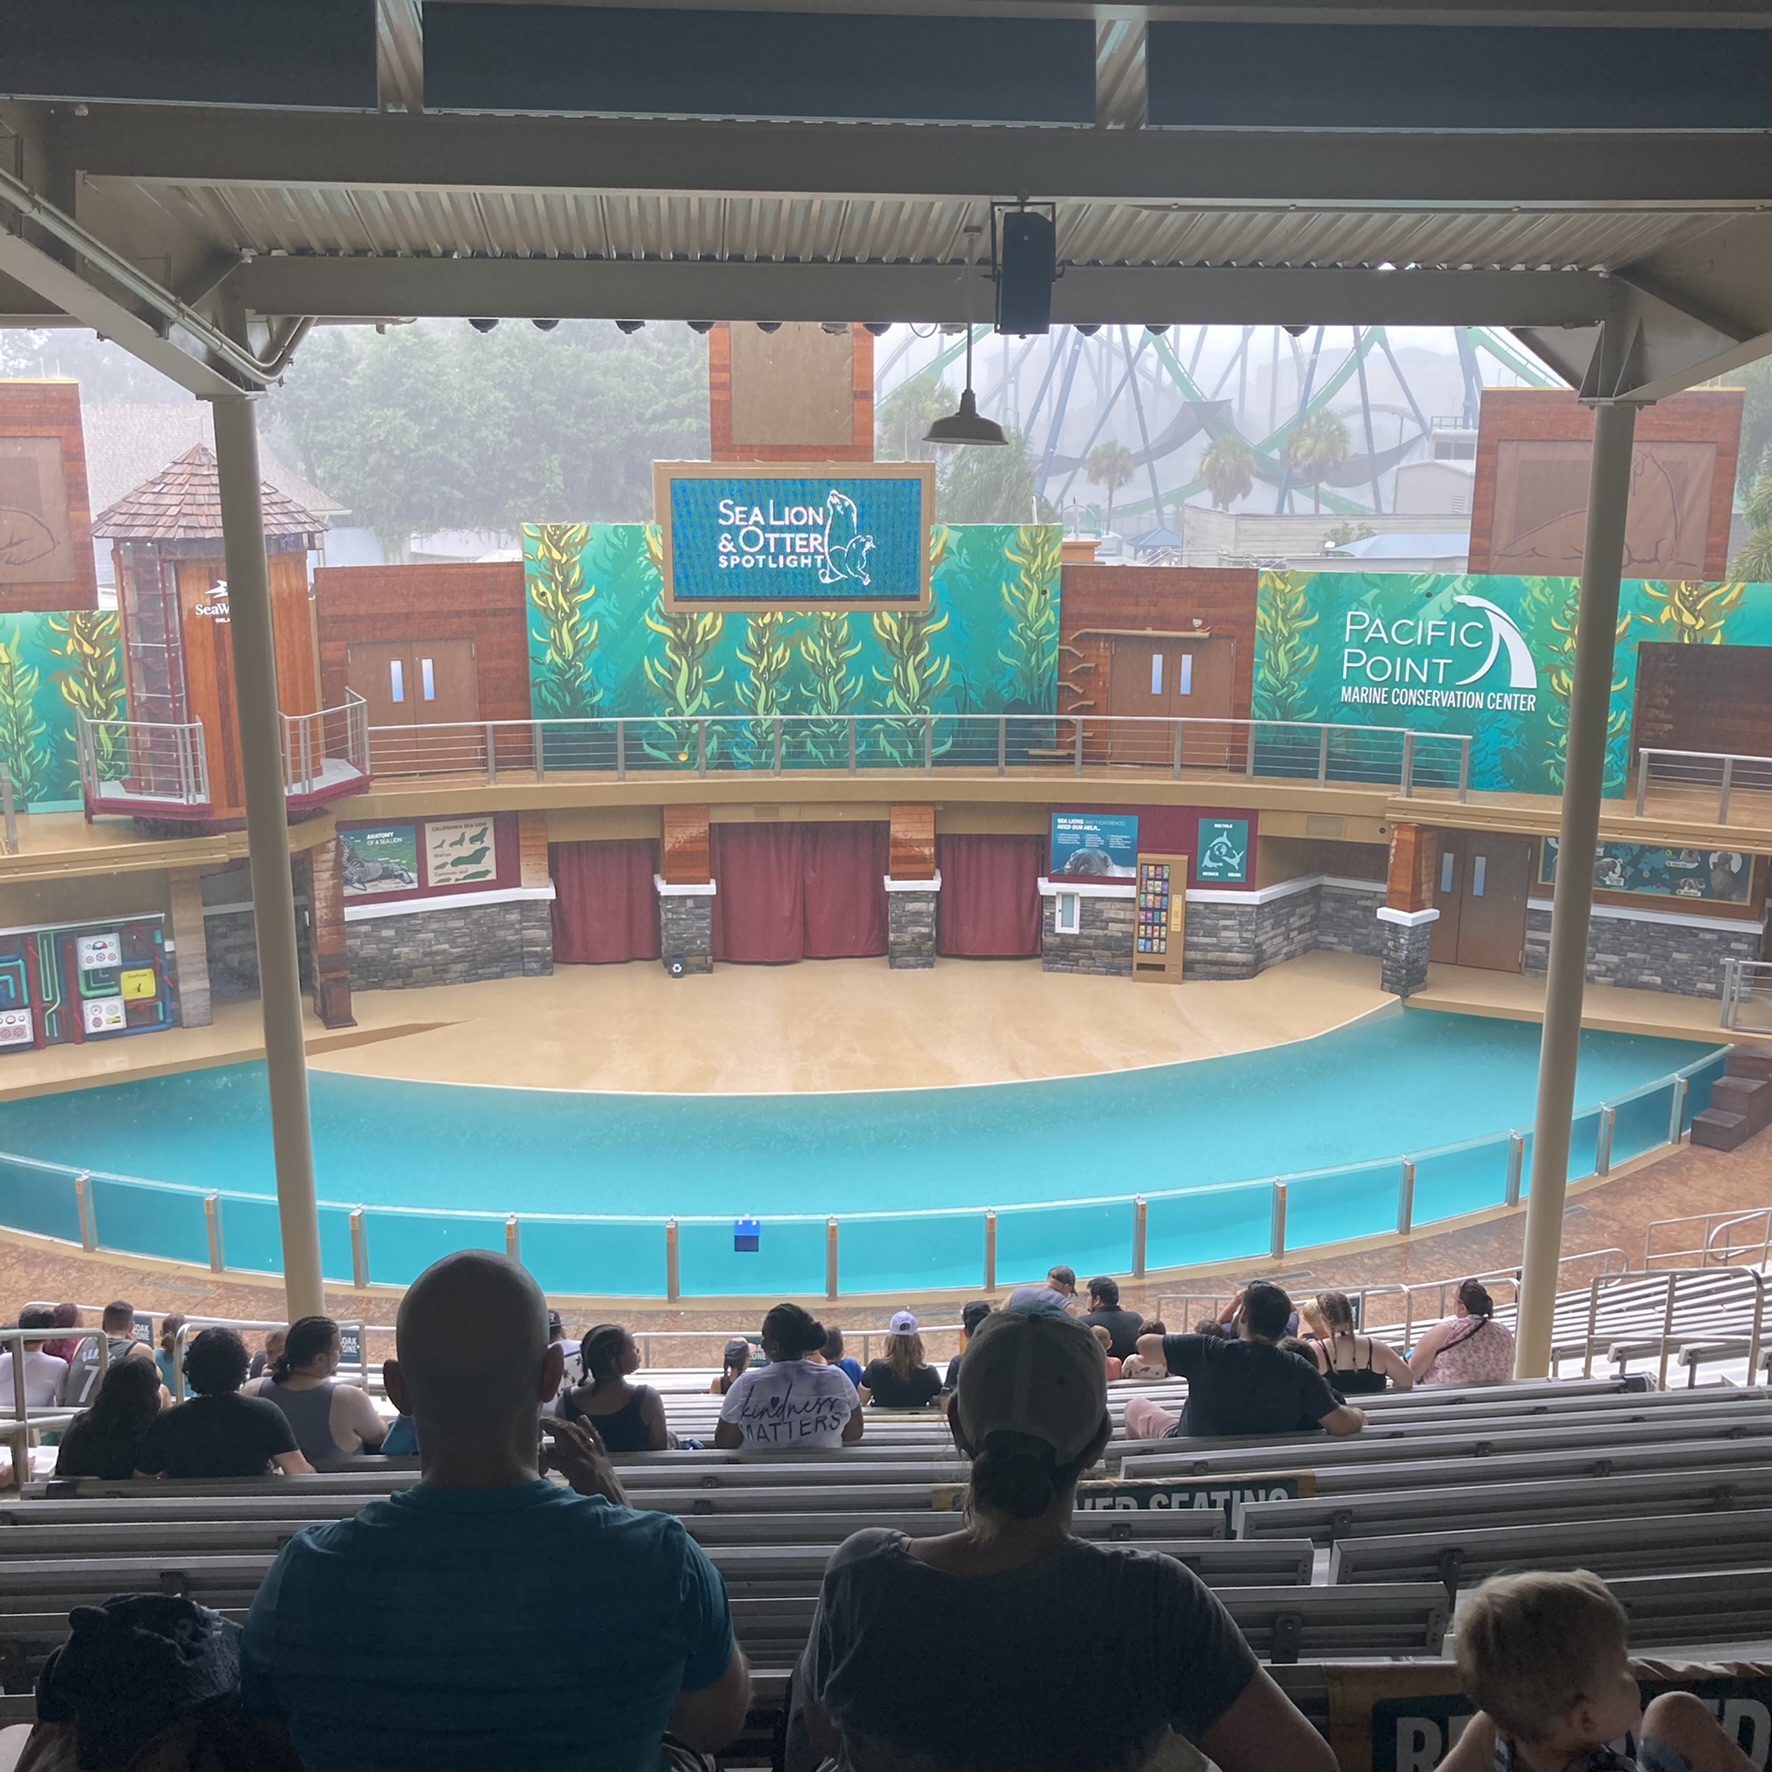 The One Can’t Miss Show at SeaWorld Orlando: Sea Lion and Otter Spotlight